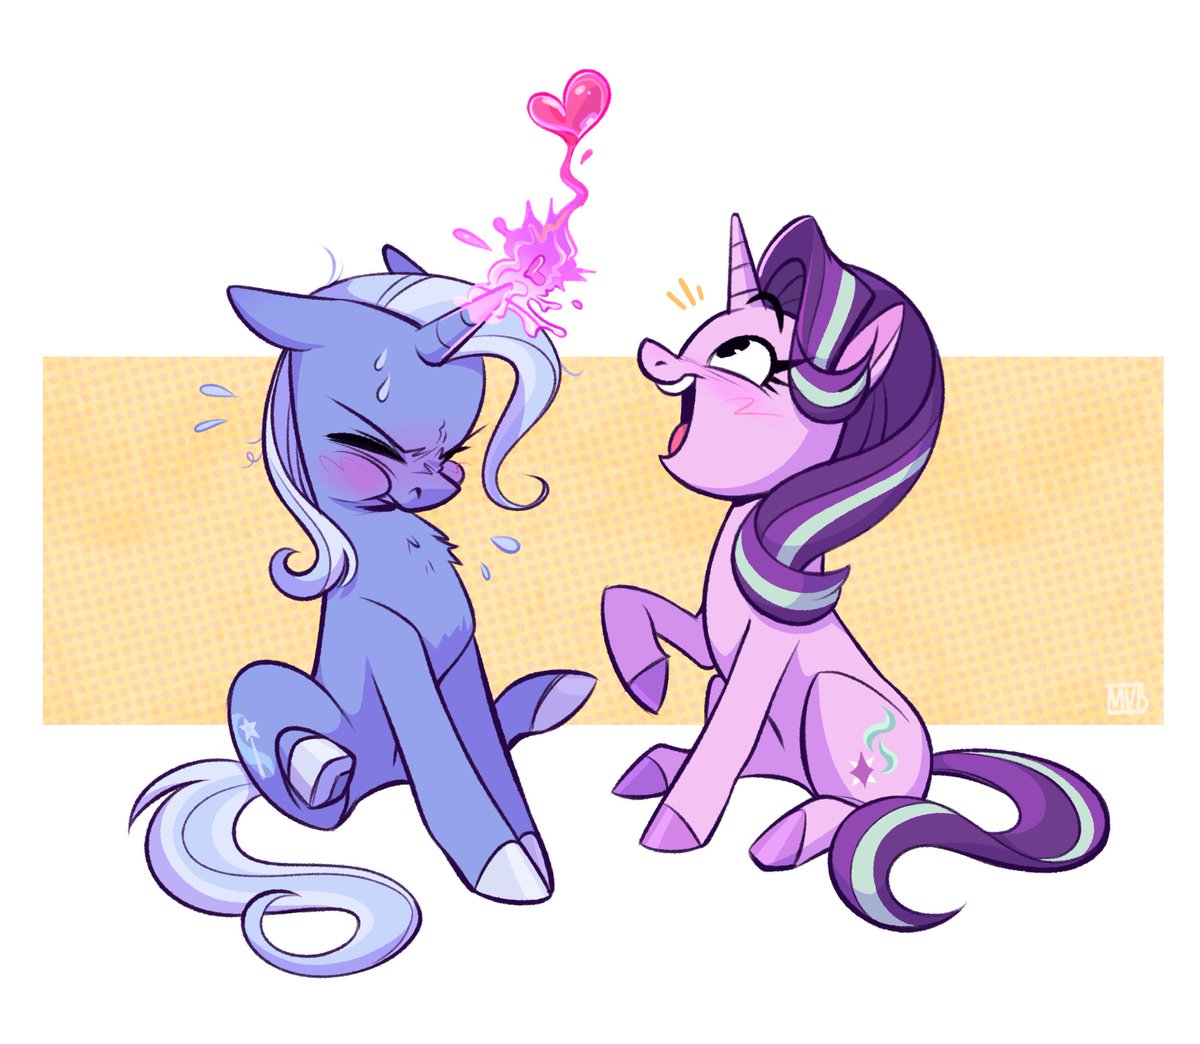 Trixie is trying XD 
Happy Hearts and Hooves day, everypony 💕✨
.
.
.
#heartsandhoovesday #mlpfanart #mlpart #startrix #mlpstartrix #mylittleponyart #mlpship #starlightglimmer #trixielulamoon #mlpg4